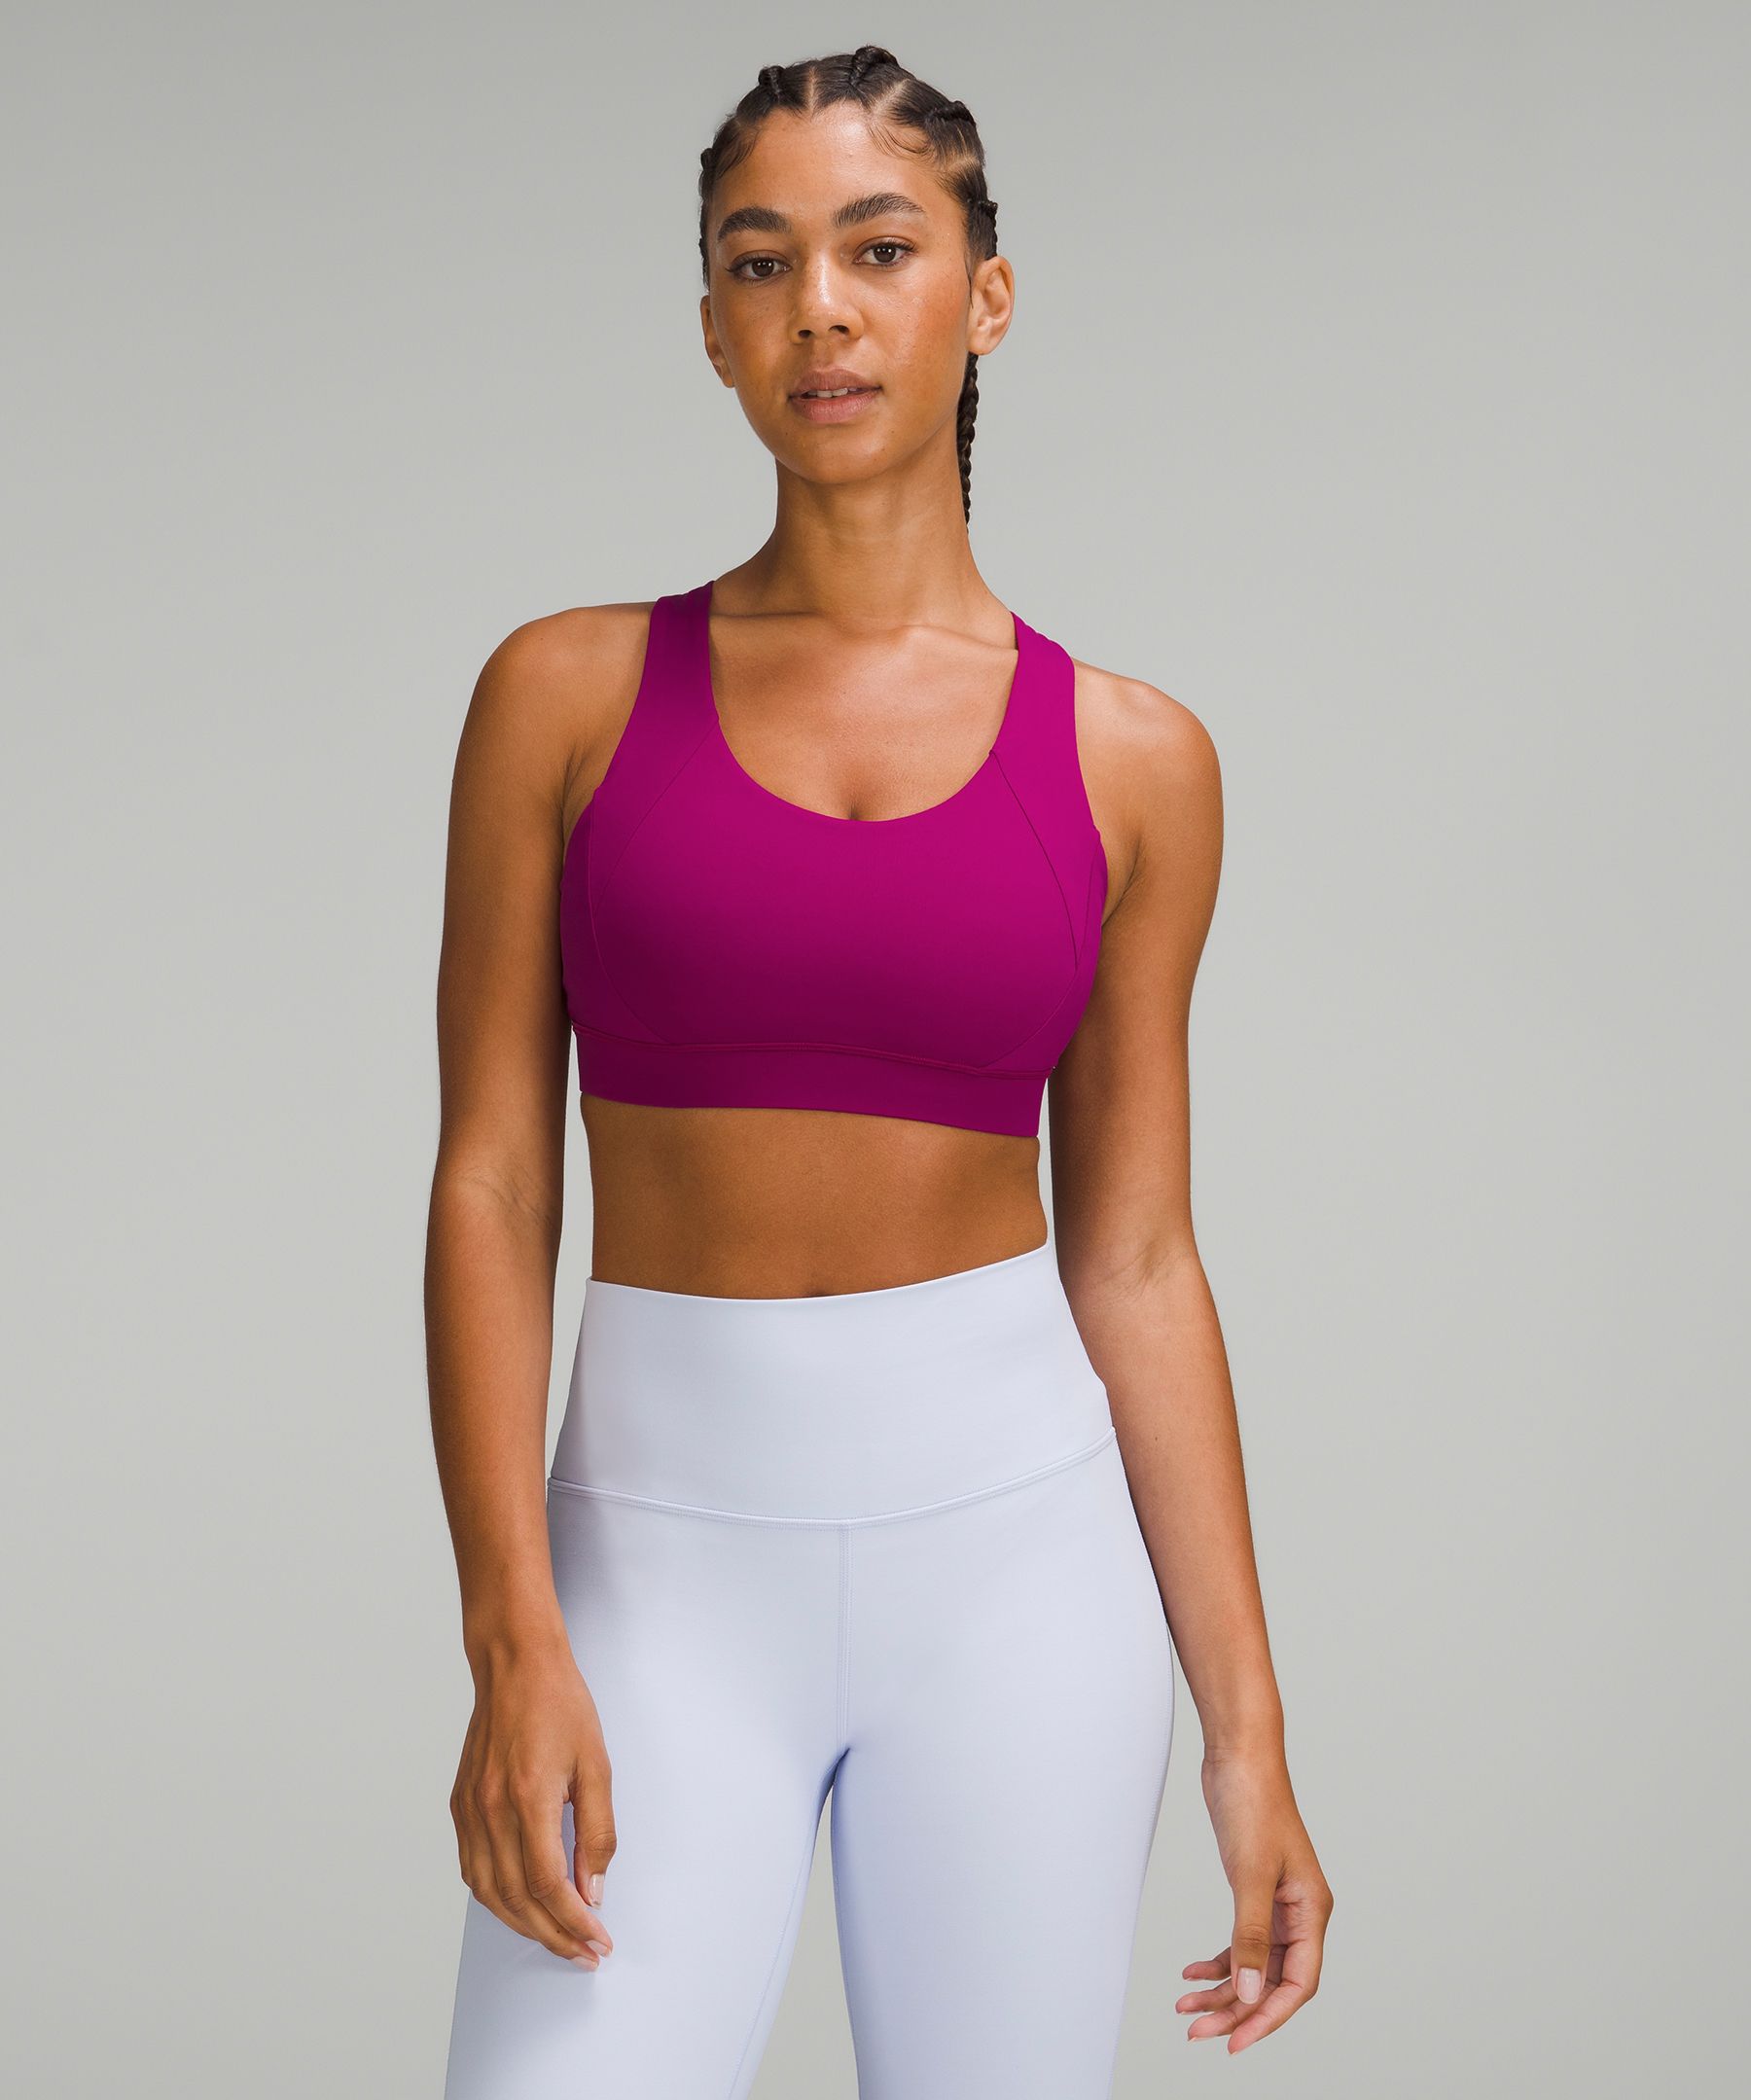 Lululemon Free To Be Elevated Bra Light Support, Dd/ddd(e) Cup In Magenta Purple